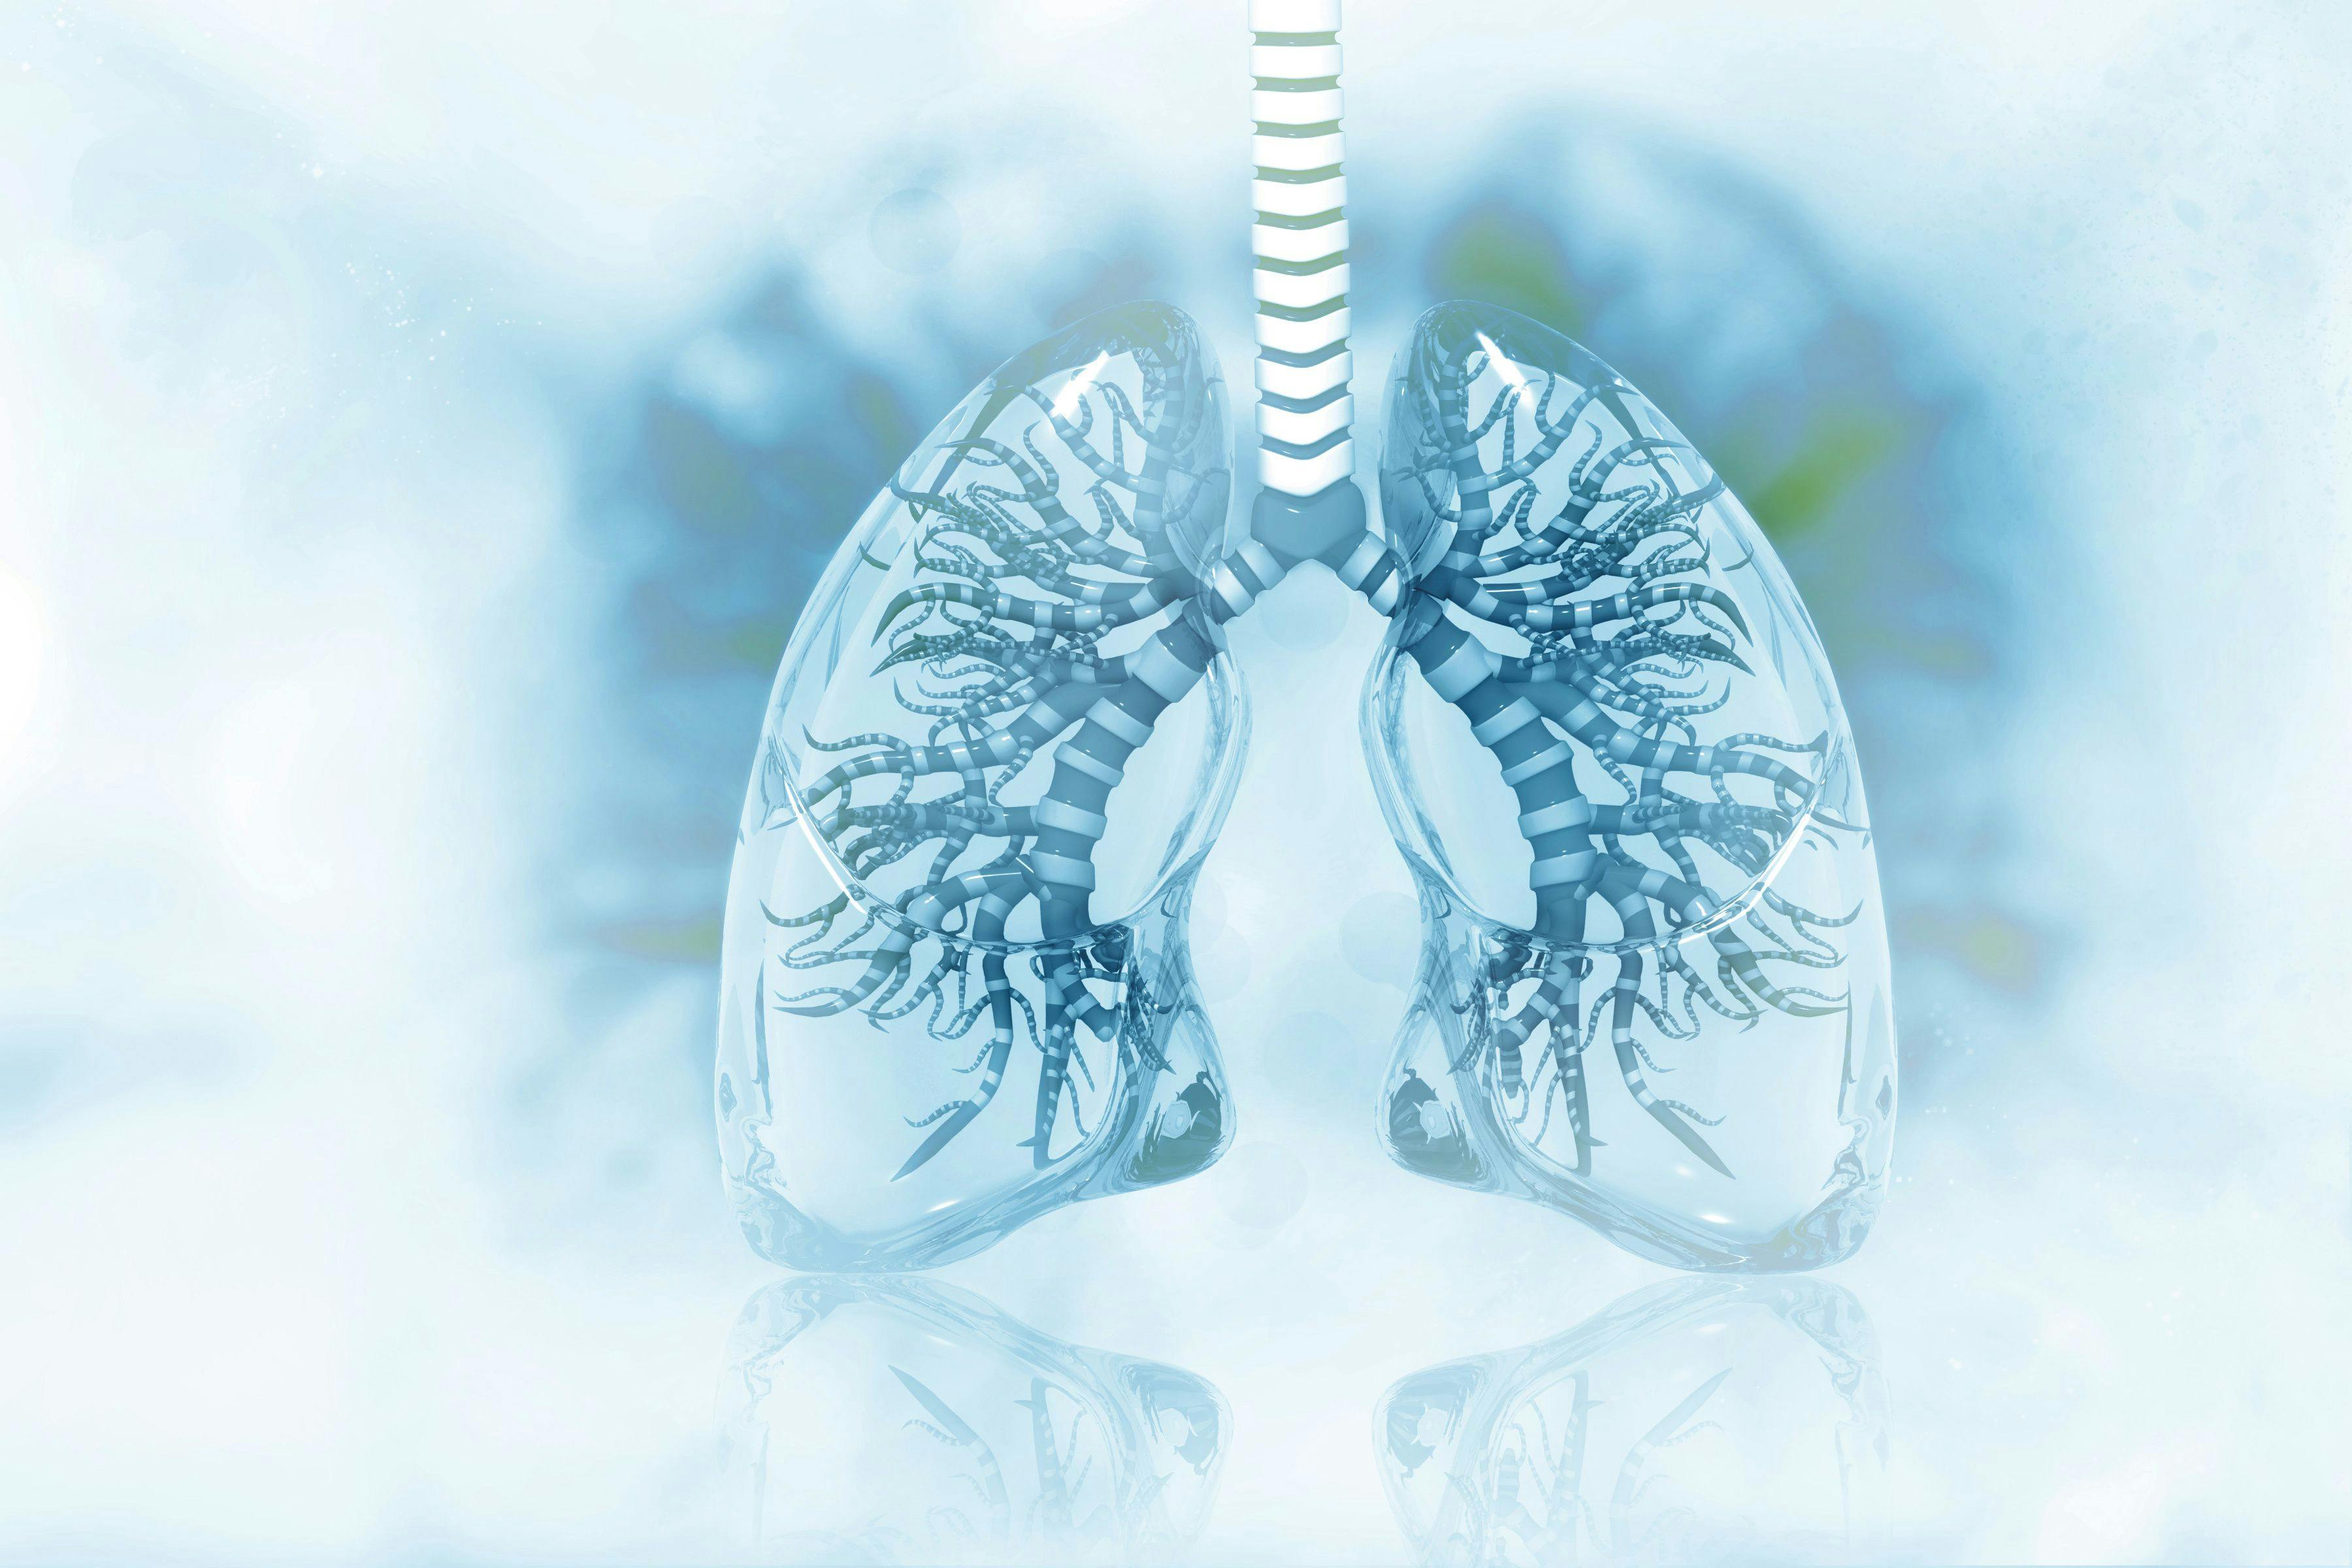 Human lungs on scientific background | Crystal light - stock.adobe.com